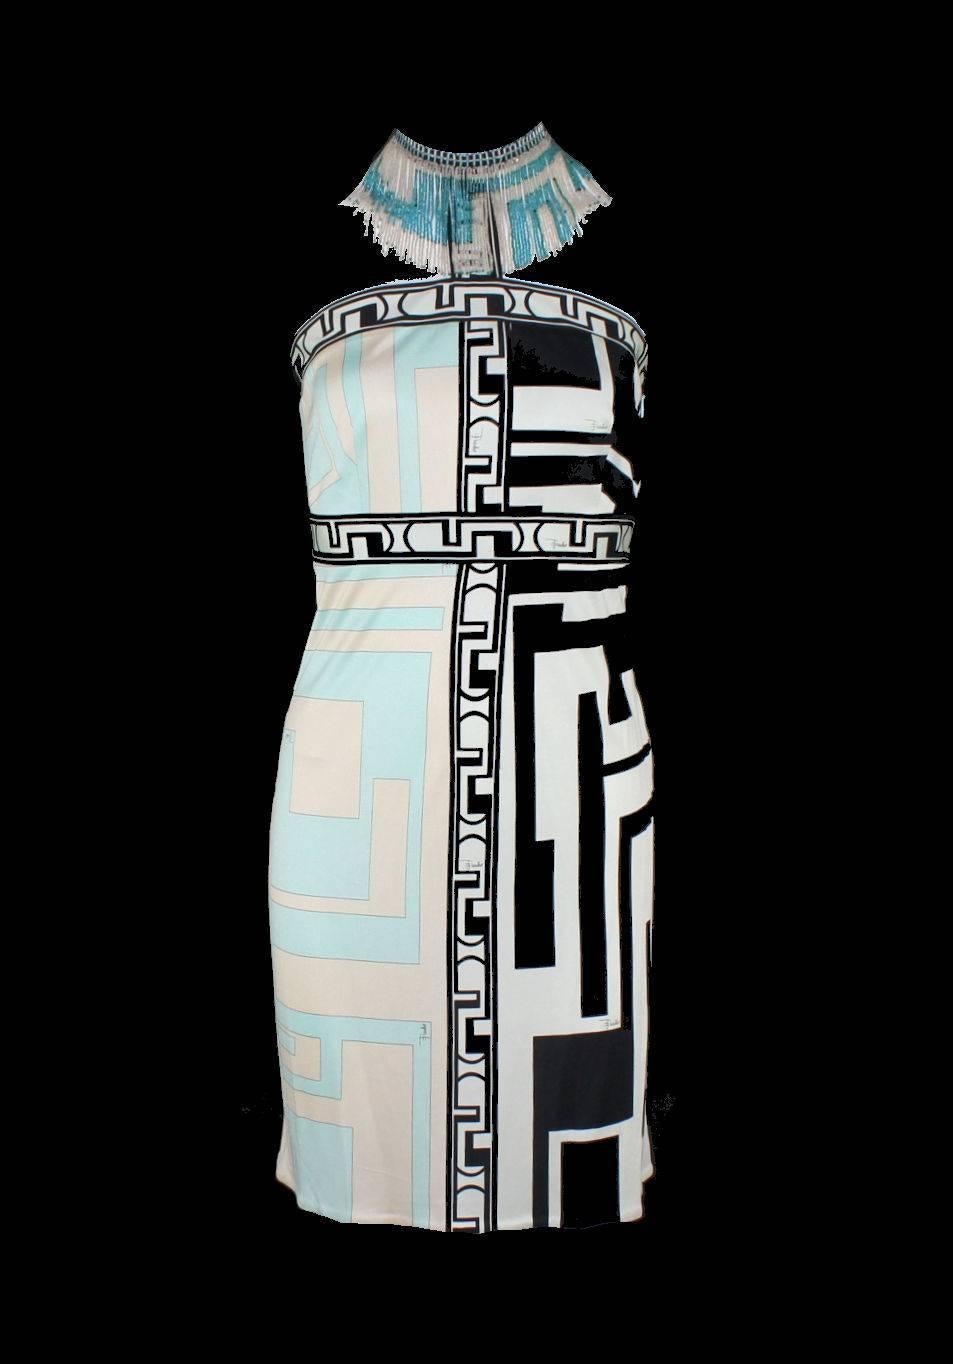 A timeless EMILIO PUCCI dress that will never go out of style!
Beautiful print with 